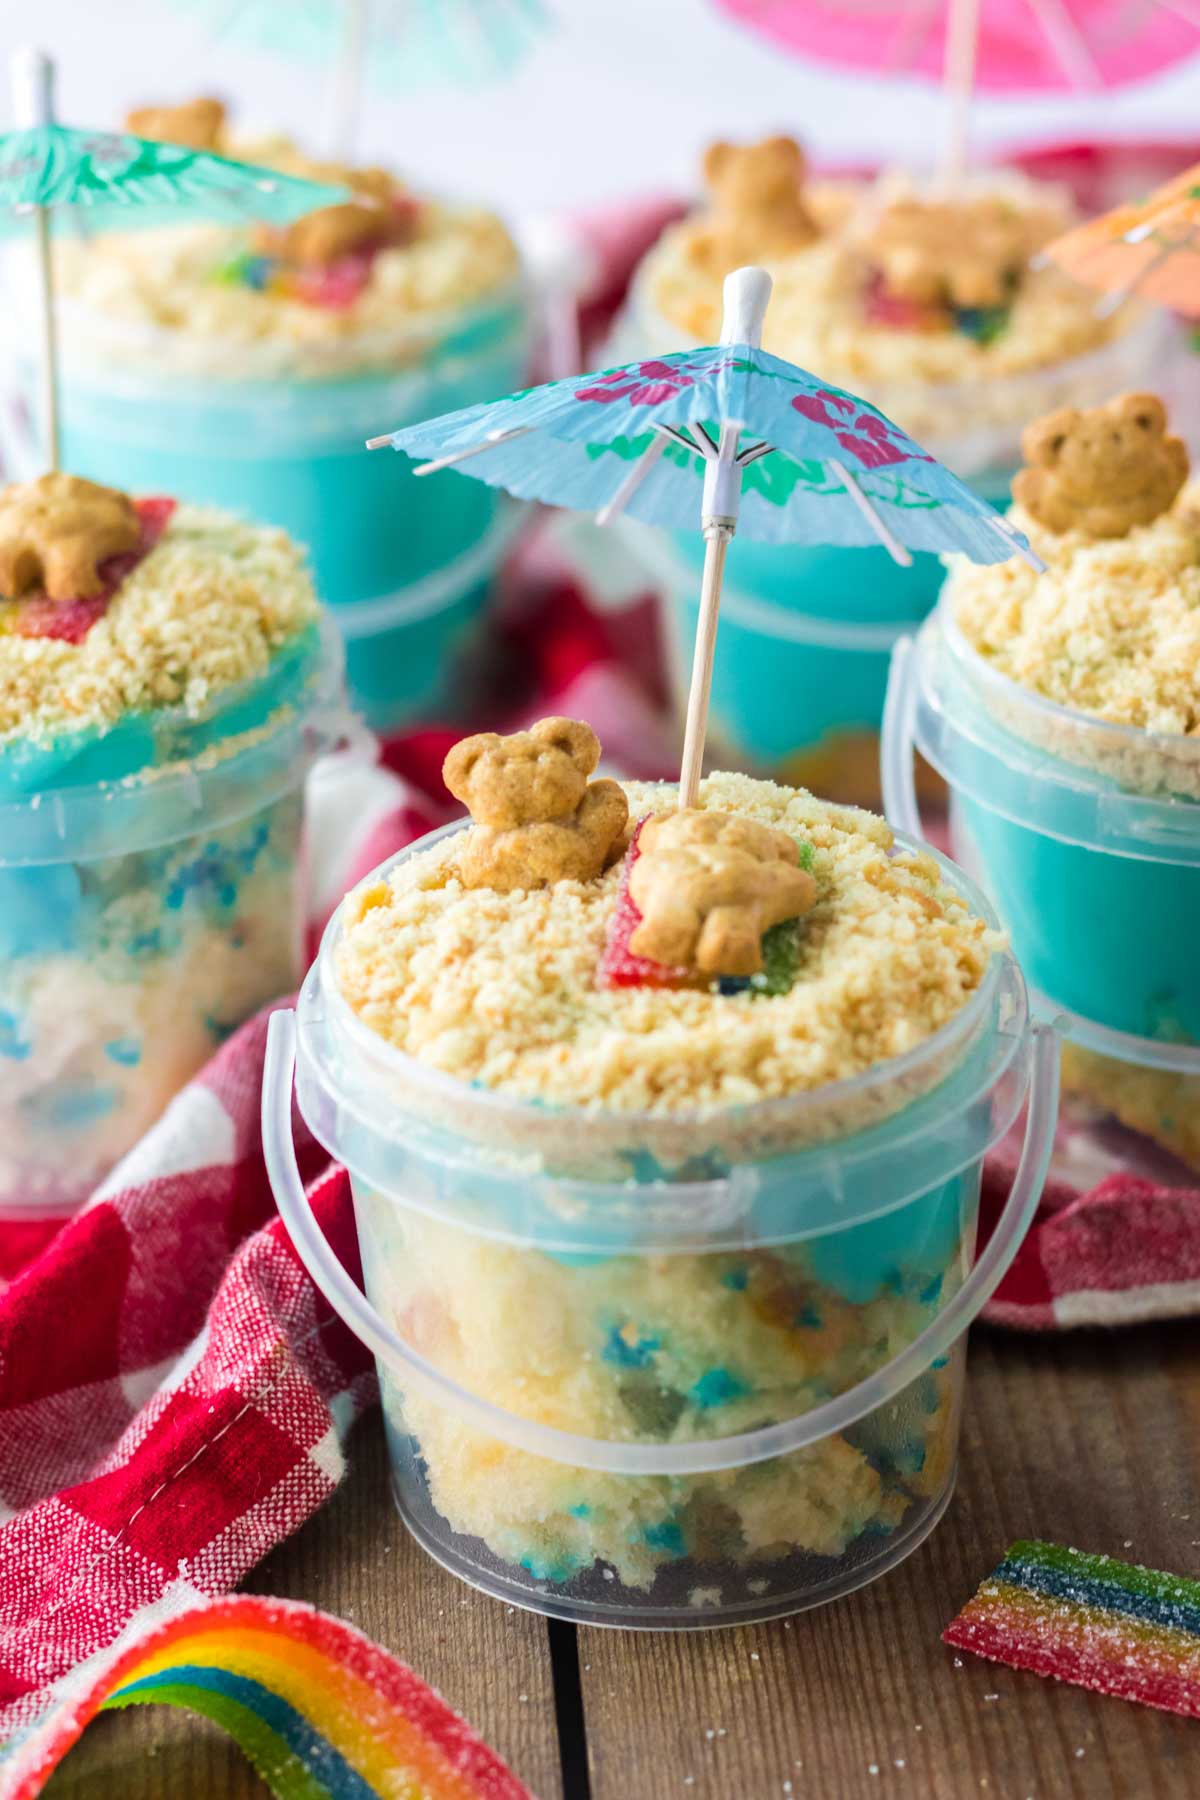 sand pudding dessert in a plastic pail with an umbrella